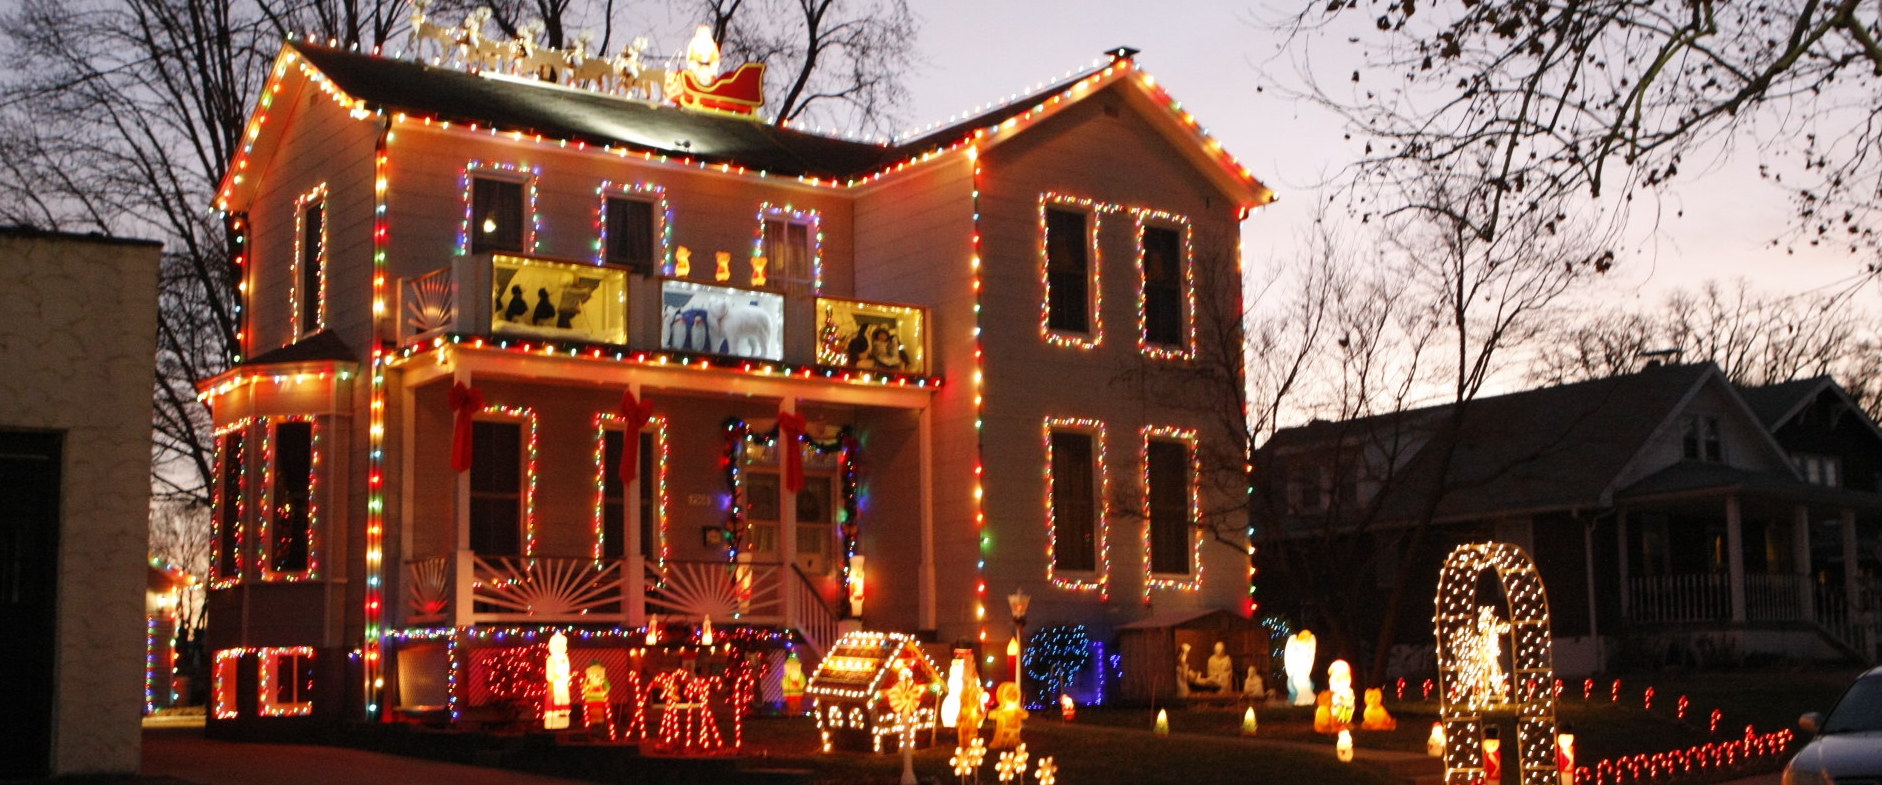 Last year for Maplewood’s Christmas house